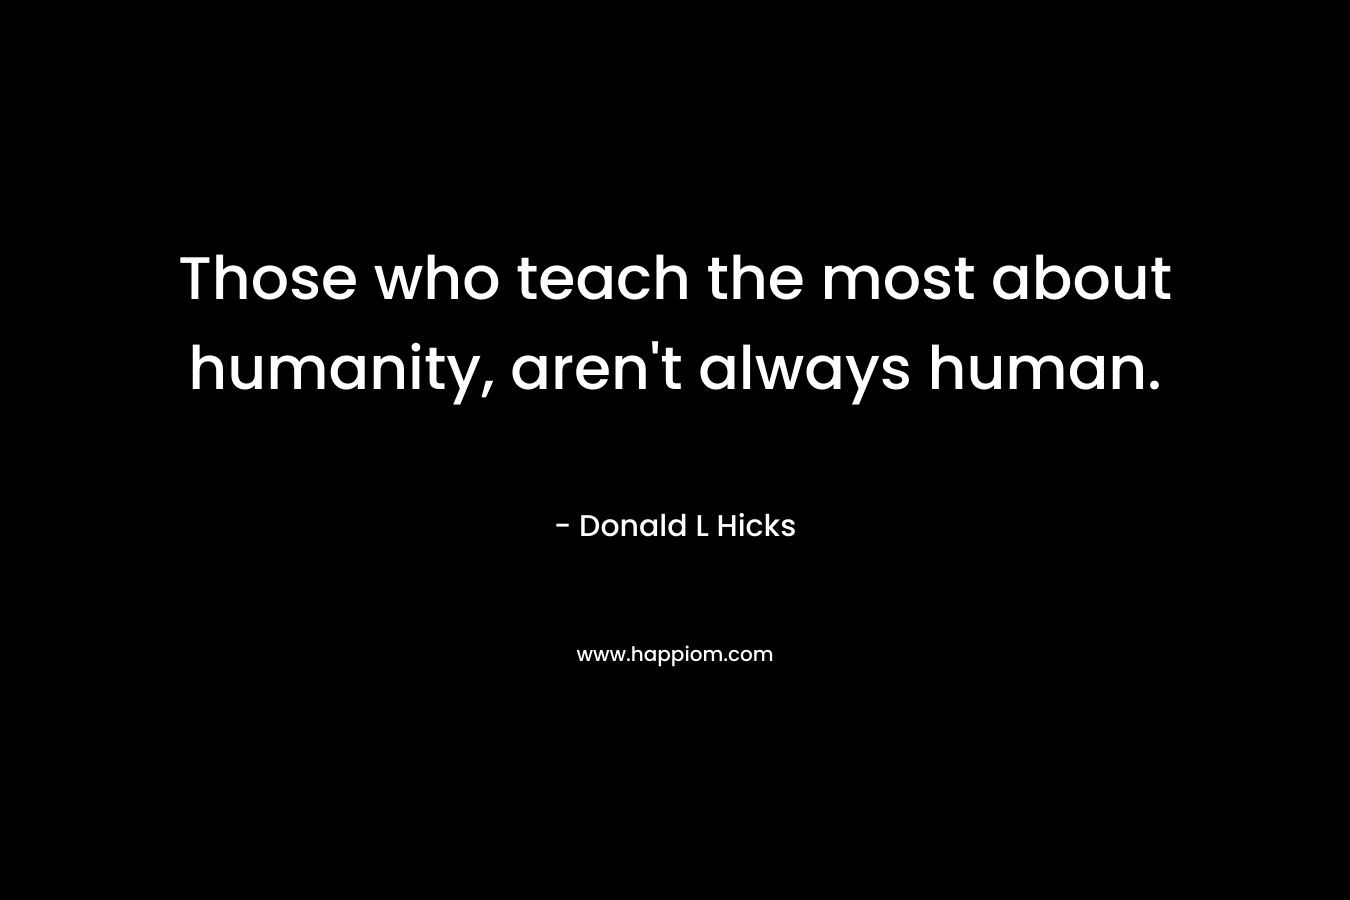 Those who teach the most about humanity, aren't always human.